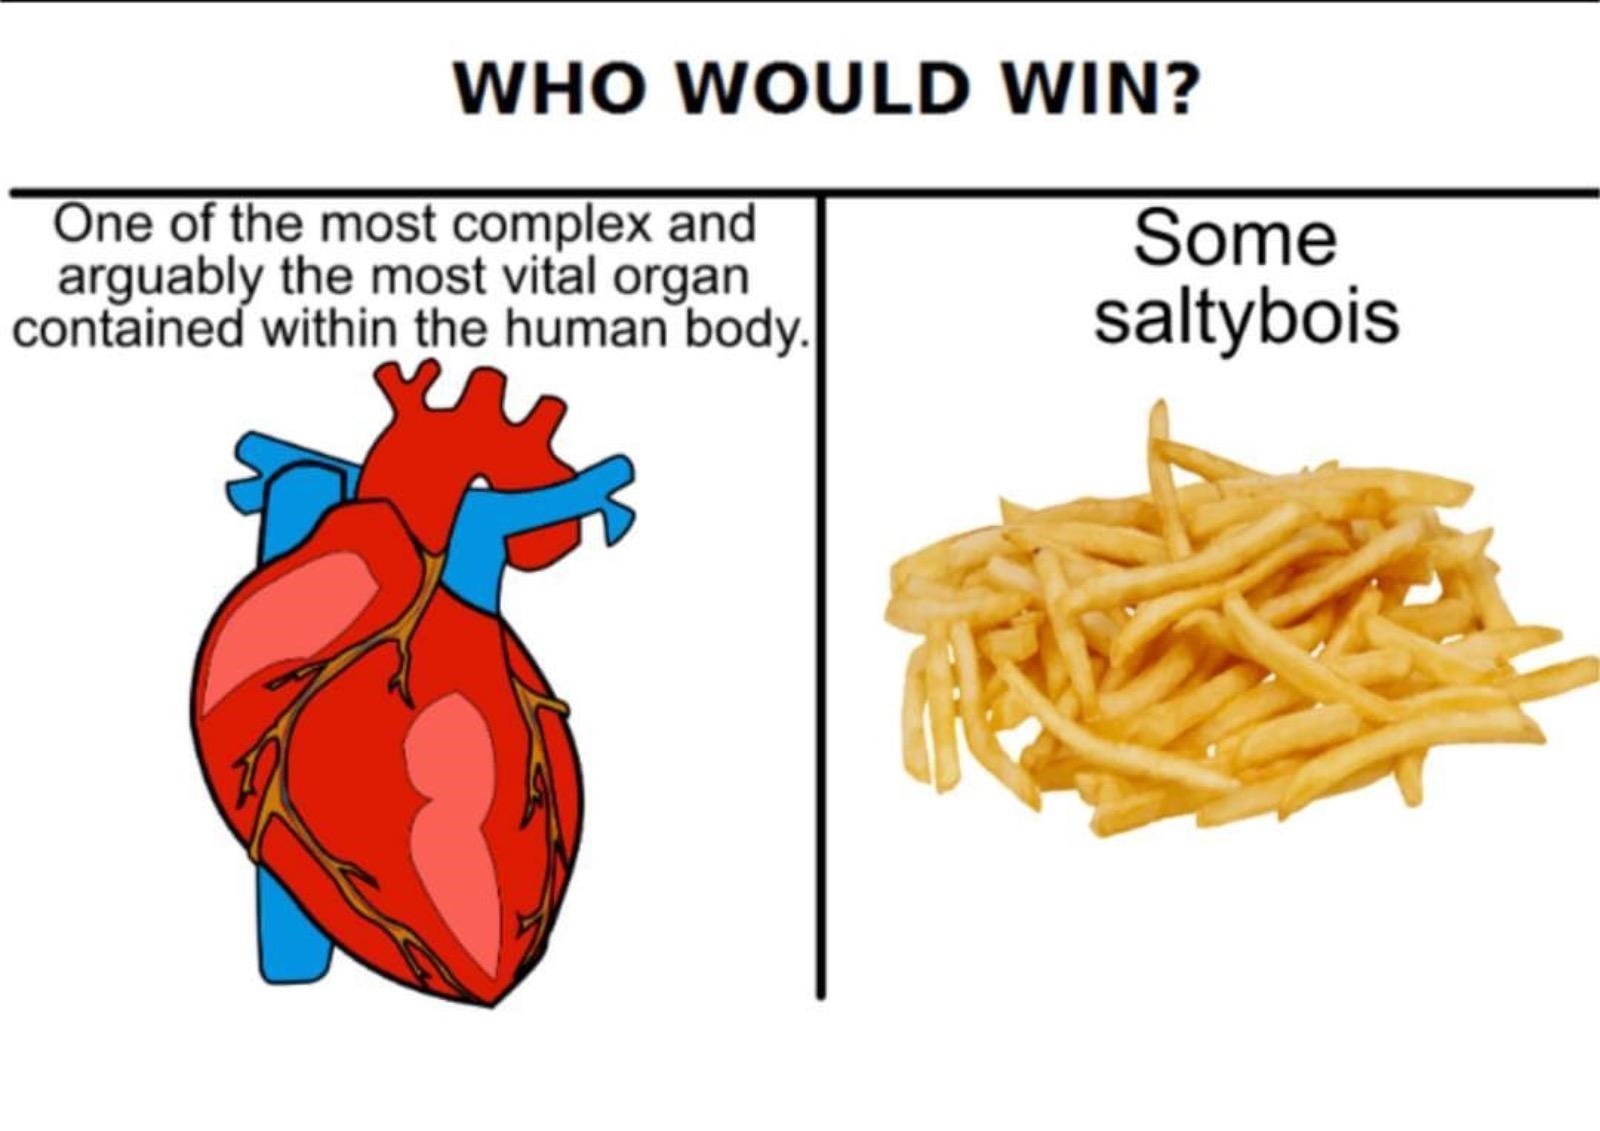 dank meme human heart clipart - Who Would Win? one by the in the hul One of the most complex and arguably the most vital organ contained within the human body. Some saltybois